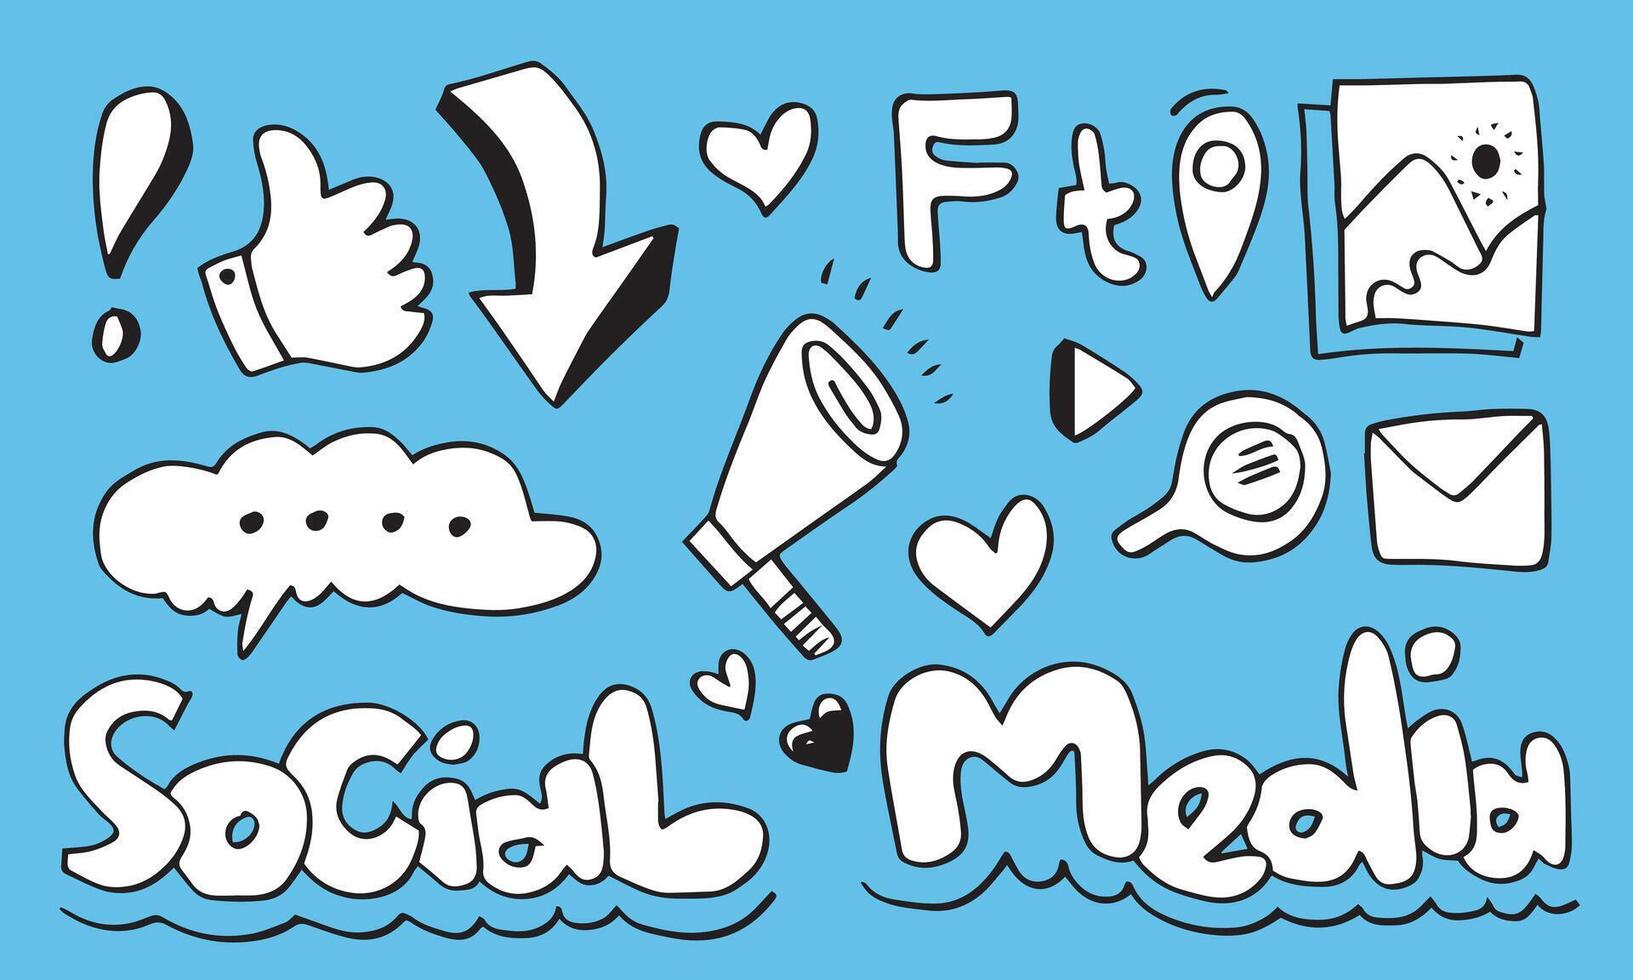 Social Media Concept with doodle style for web site. Vector illustration.